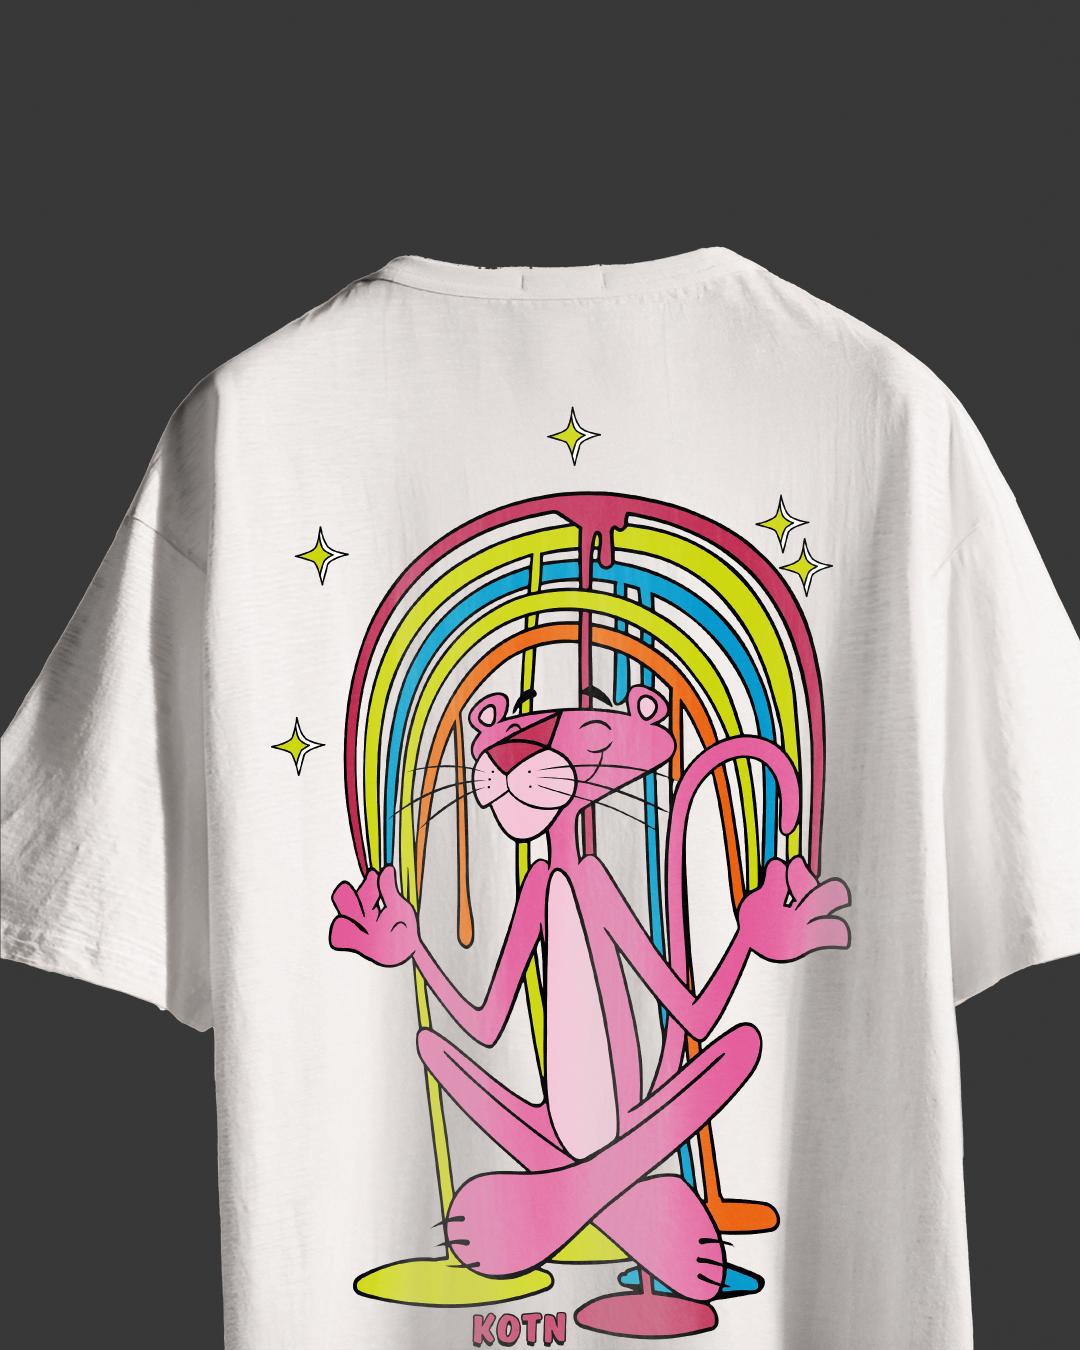 PINK PANTHER: ITS NOT EASY OVERSIZED T-SHIRT